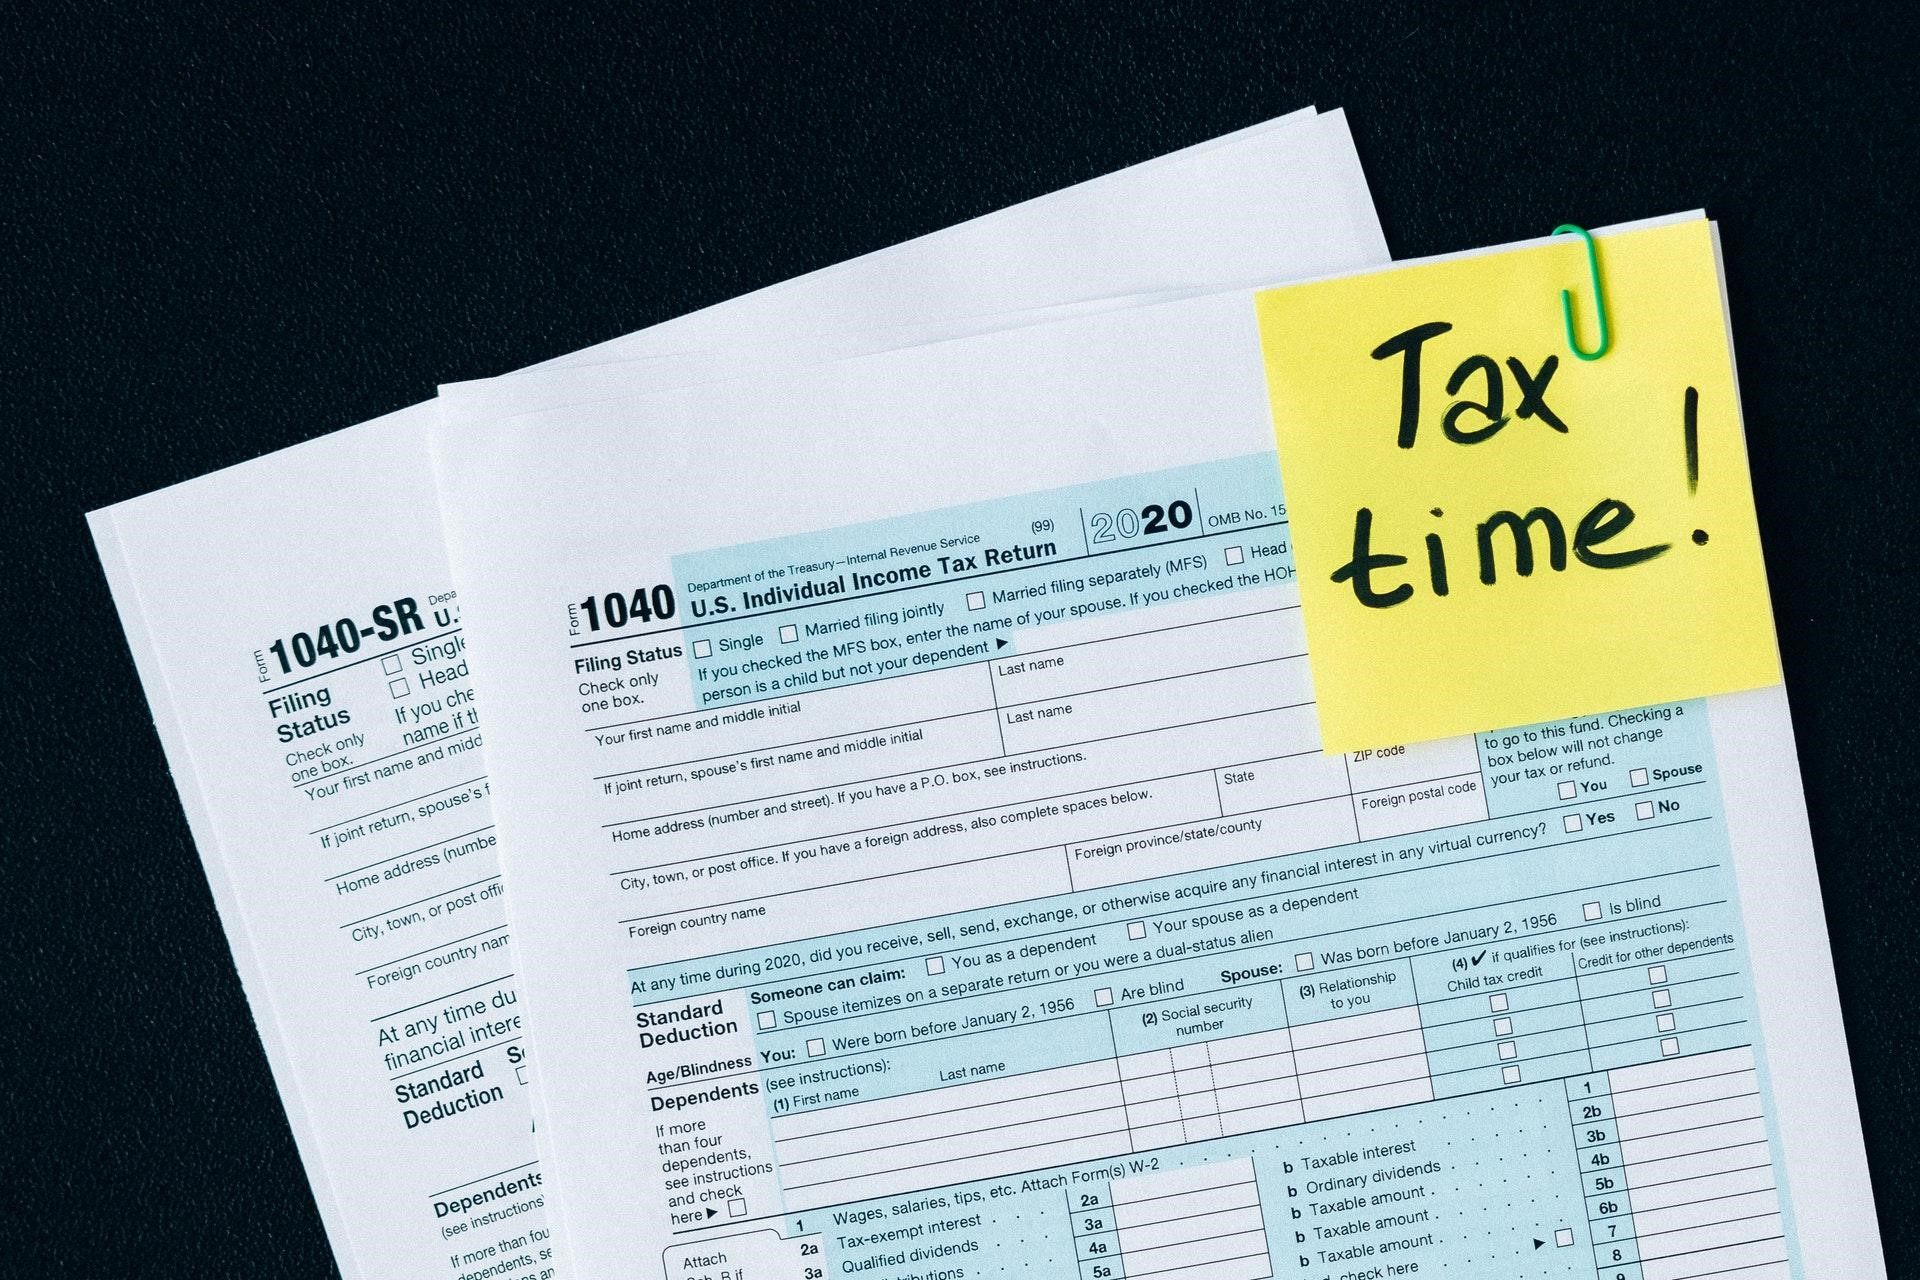 08_RueBaRue_Rental Management_Photo of a tax form with Post-It saying tax time